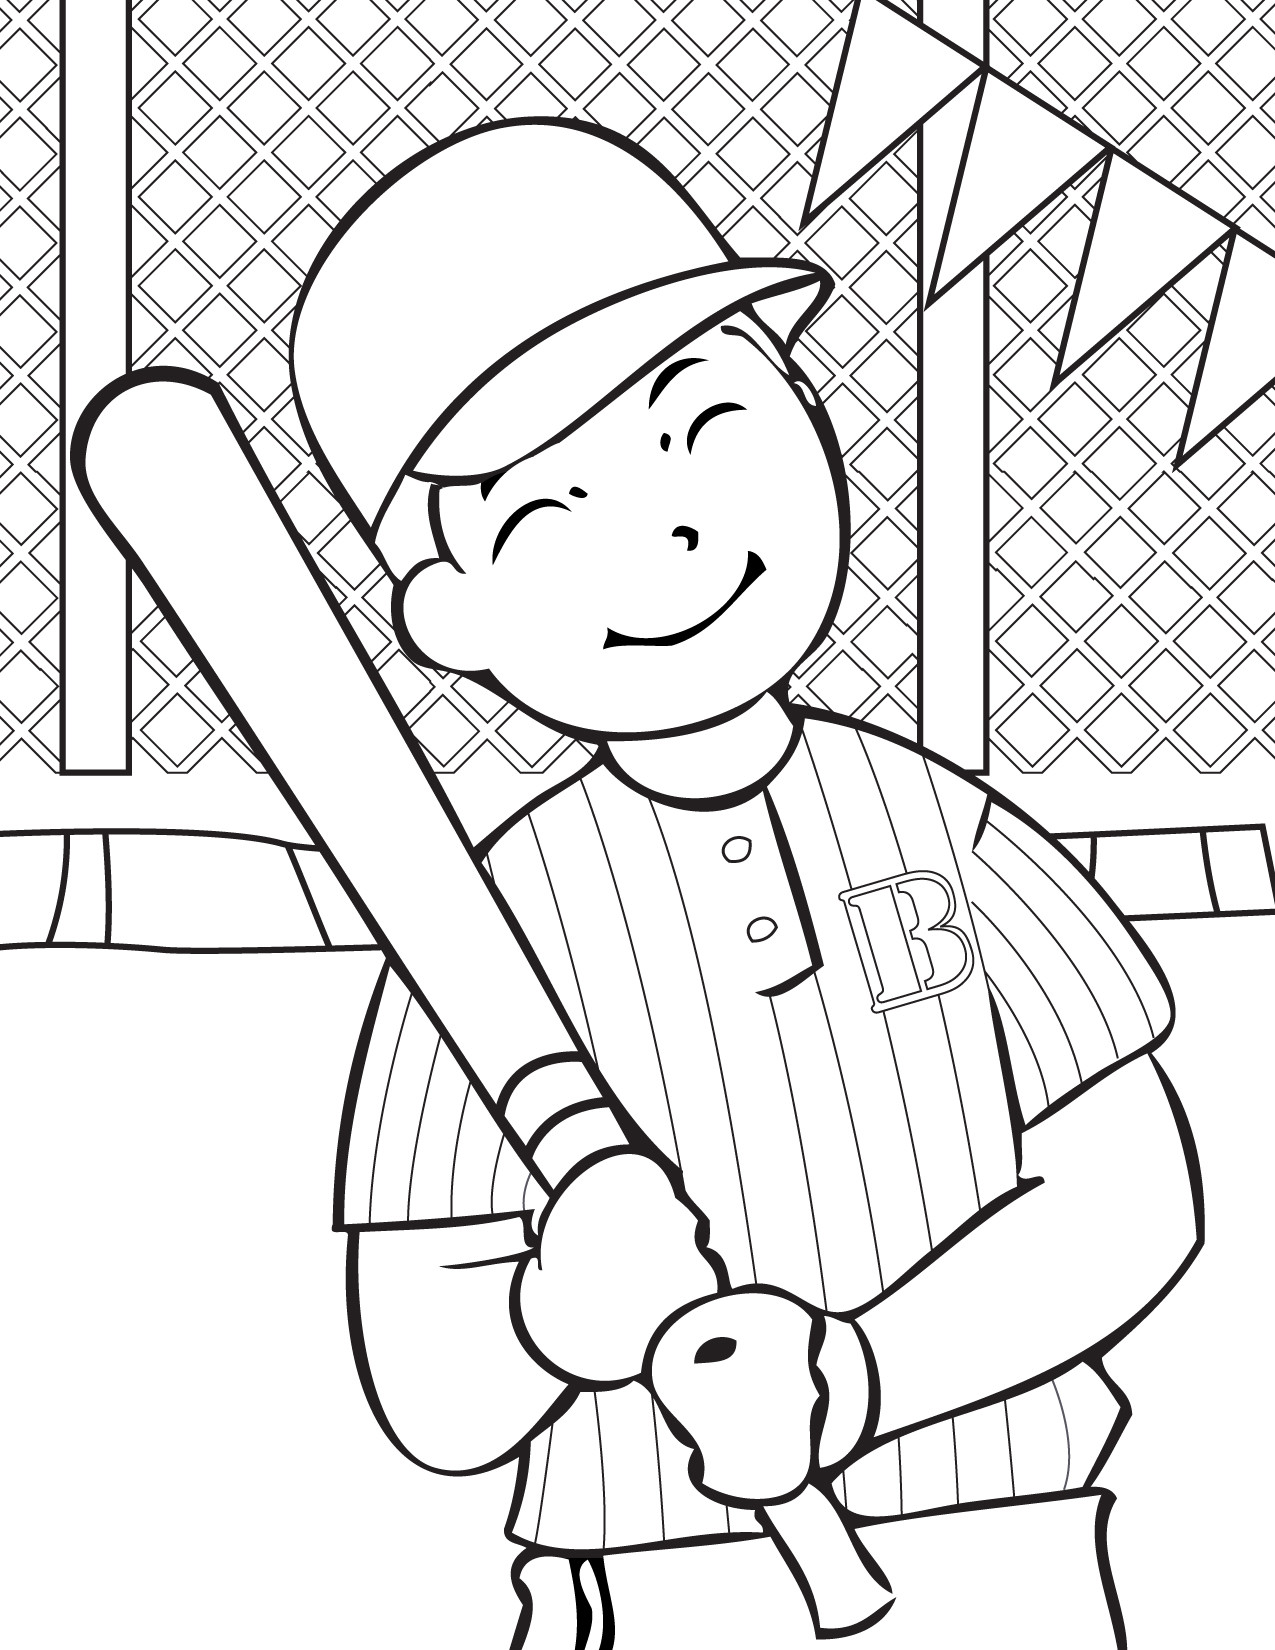 Coloring Sheets For Boys Online
 Free Printable Baseball Coloring Pages for Kids Best